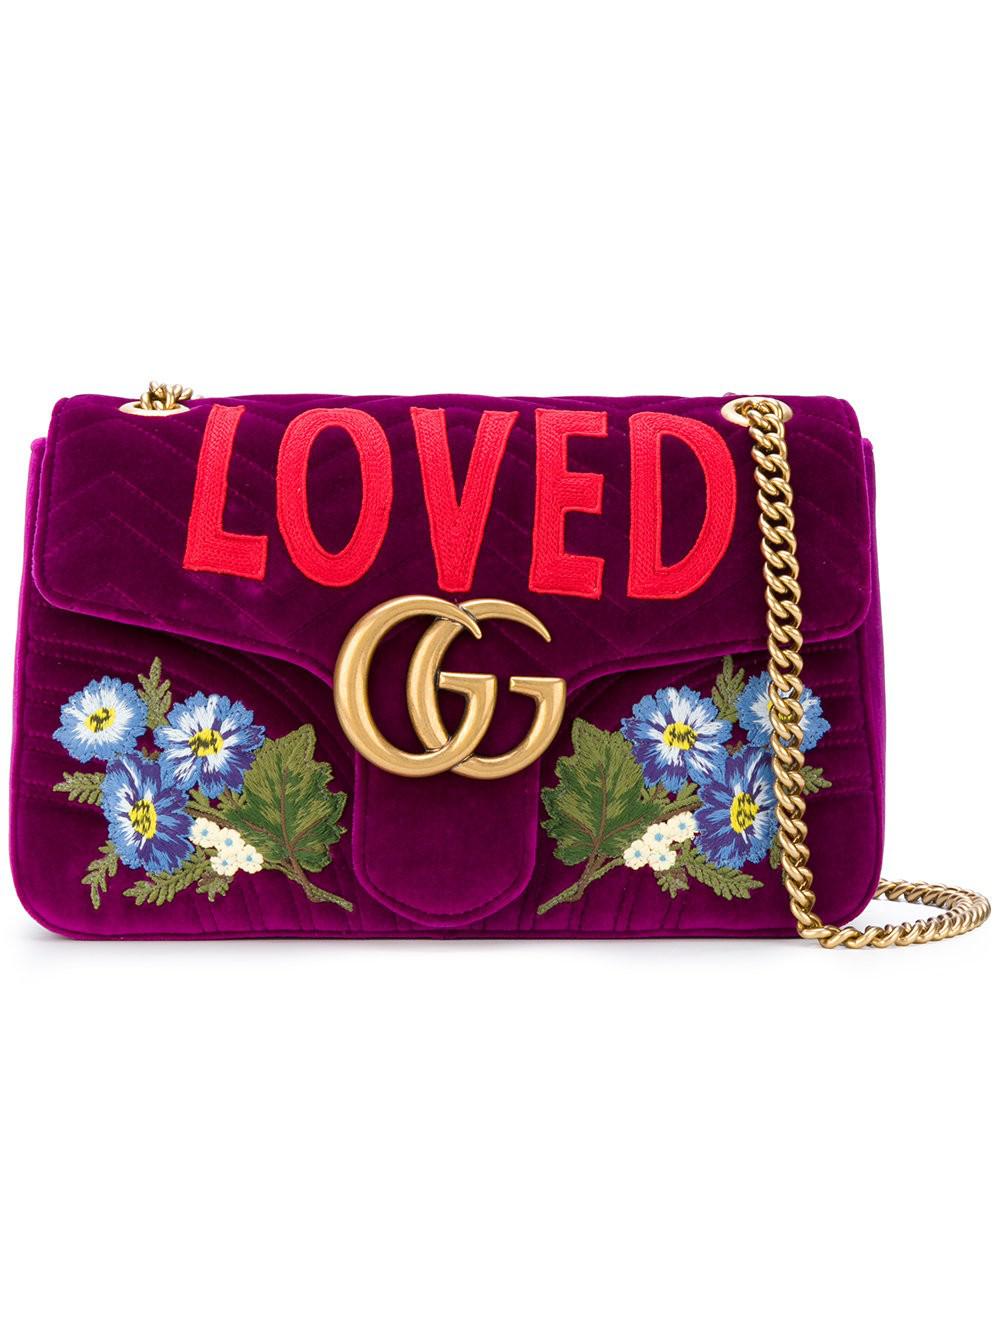 Outlaw Manners Mottle Gucci Gg Marmont Loved Bag in Purple | Lyst